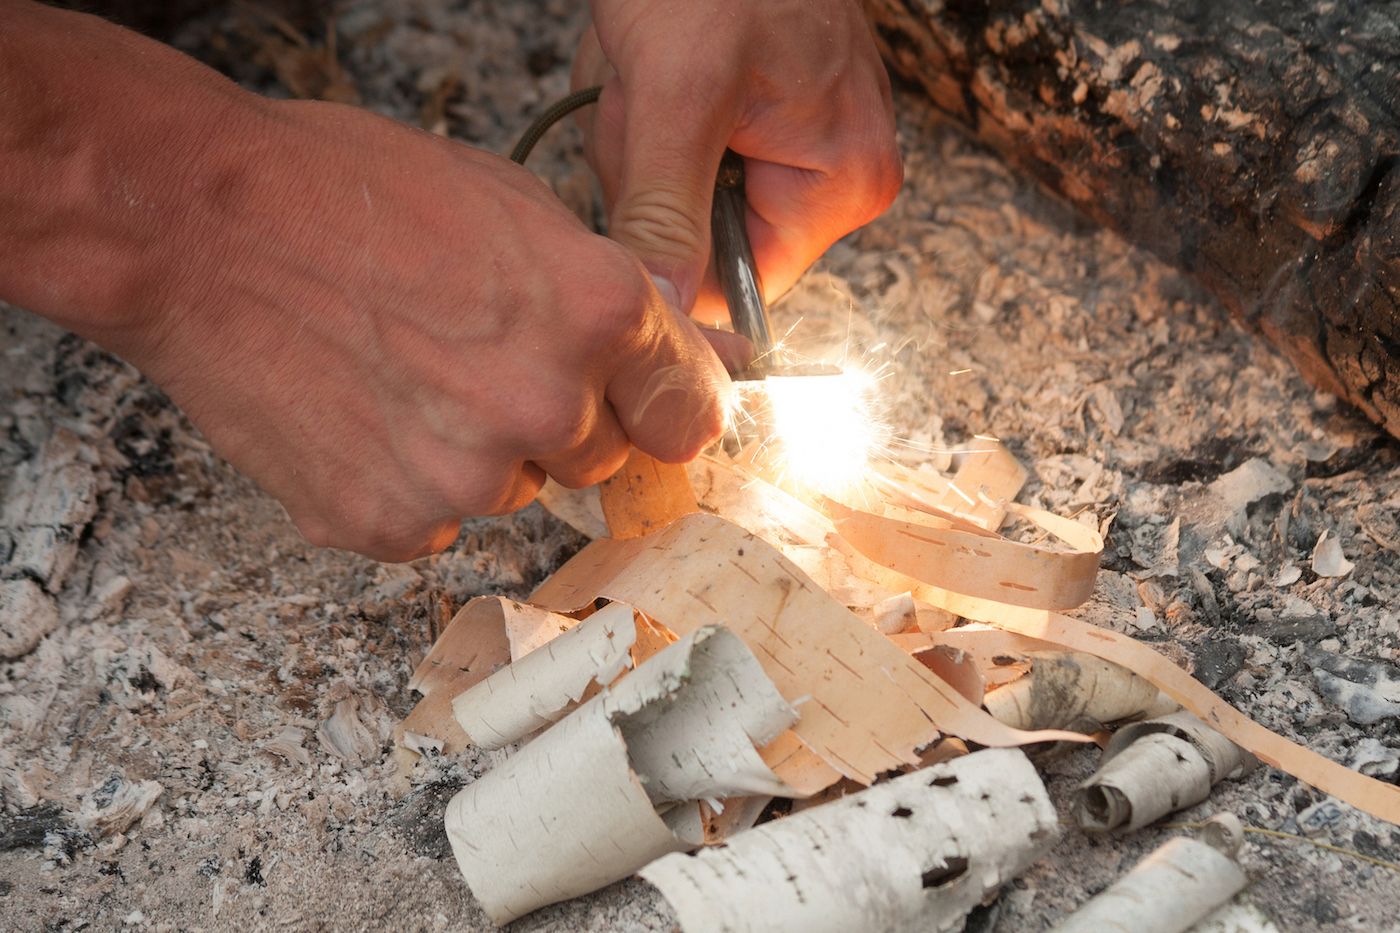 A close up of hands striking a ferro rod and producing sparks; a pile of birch bark lies below.